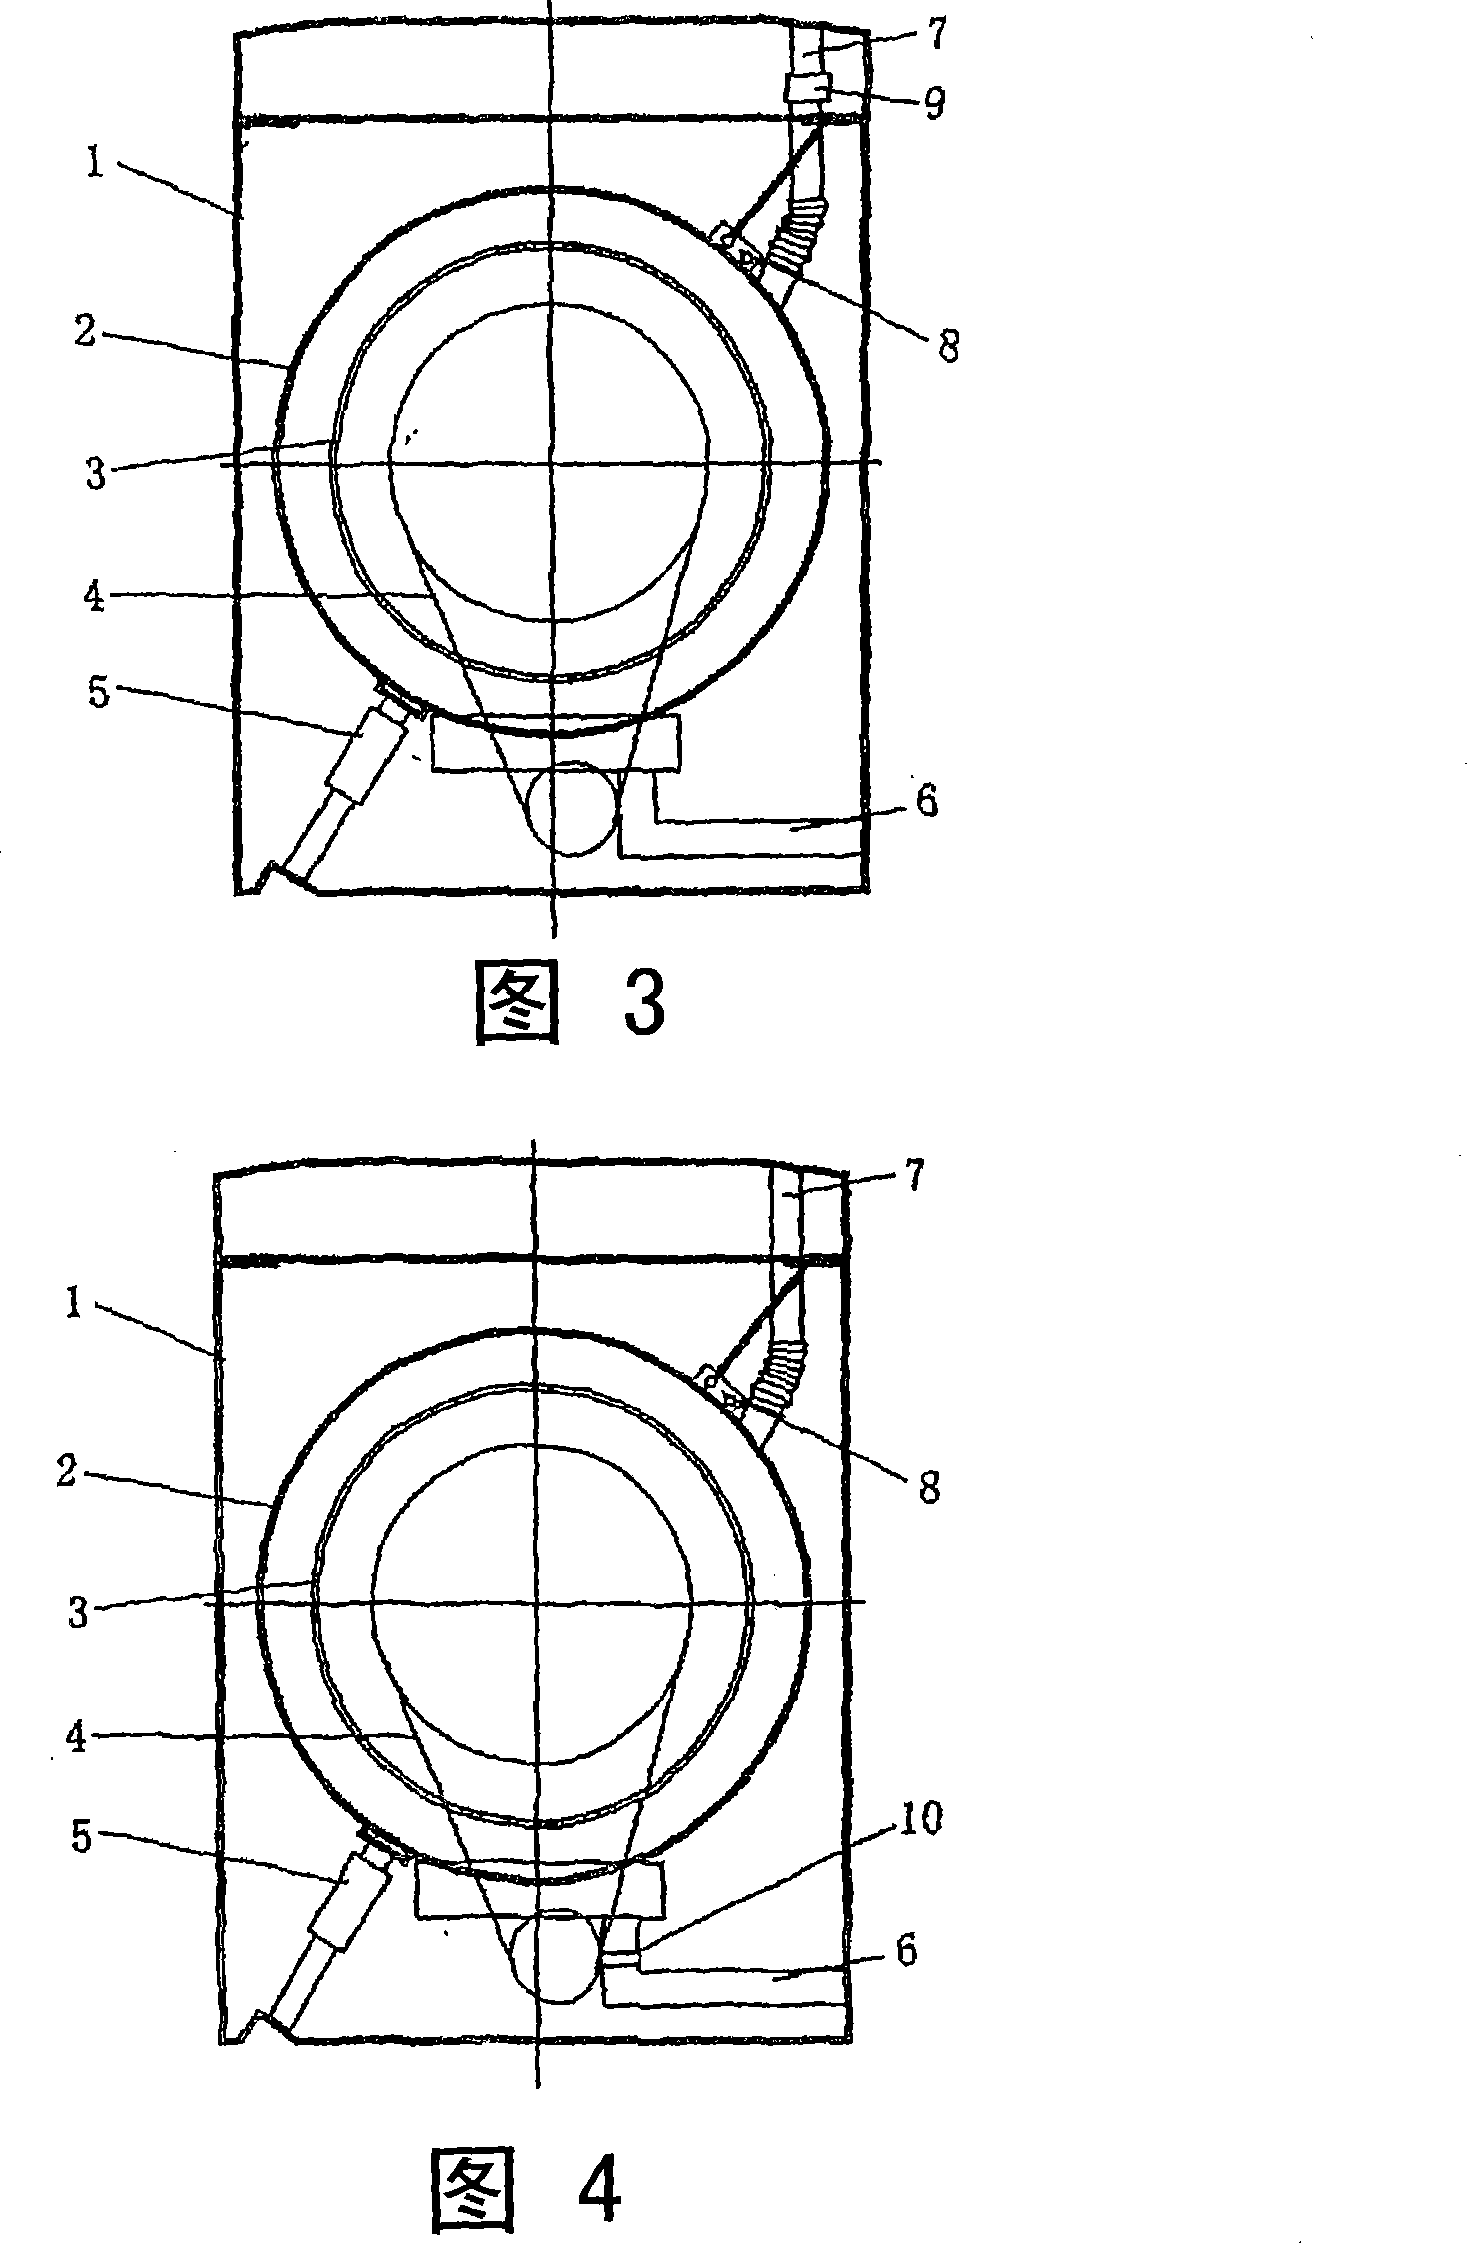 Method for determining clothes weight in laundry machine and laundry machine implementing the same method